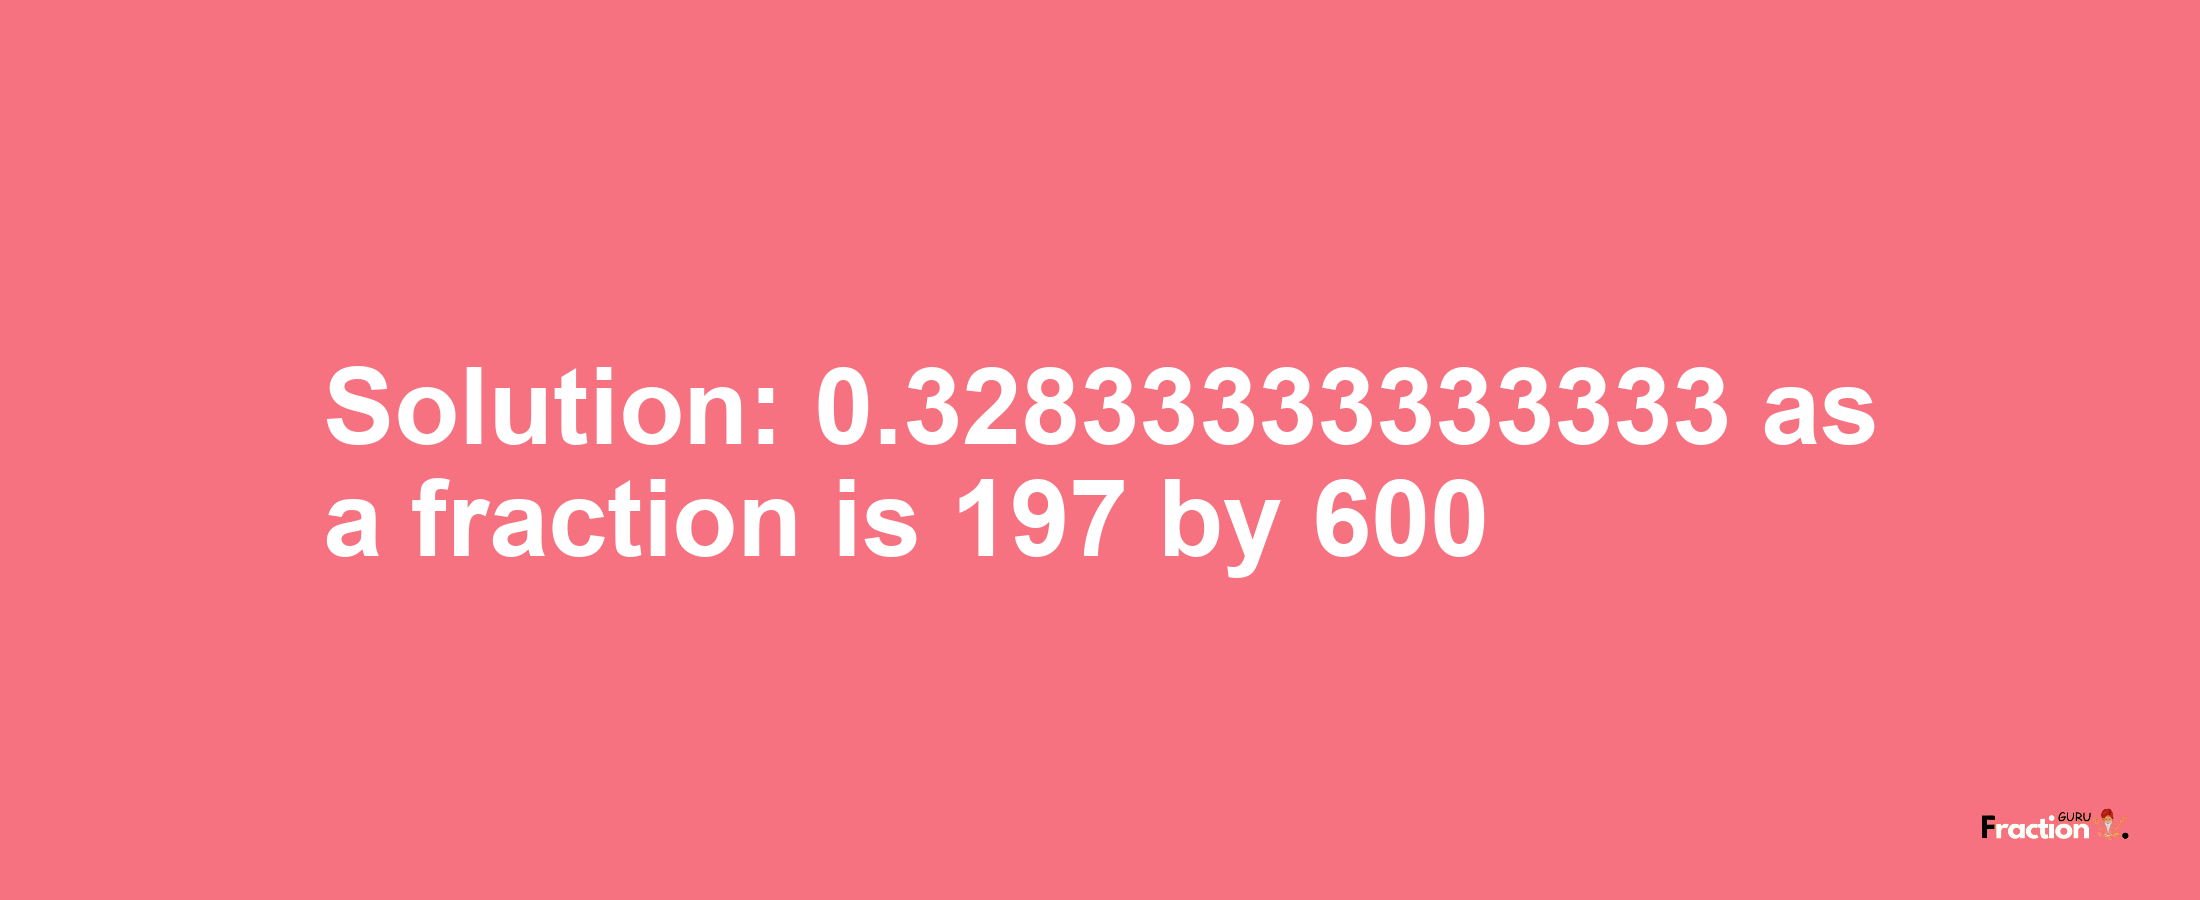 Solution:0.32833333333333 as a fraction is 197/600